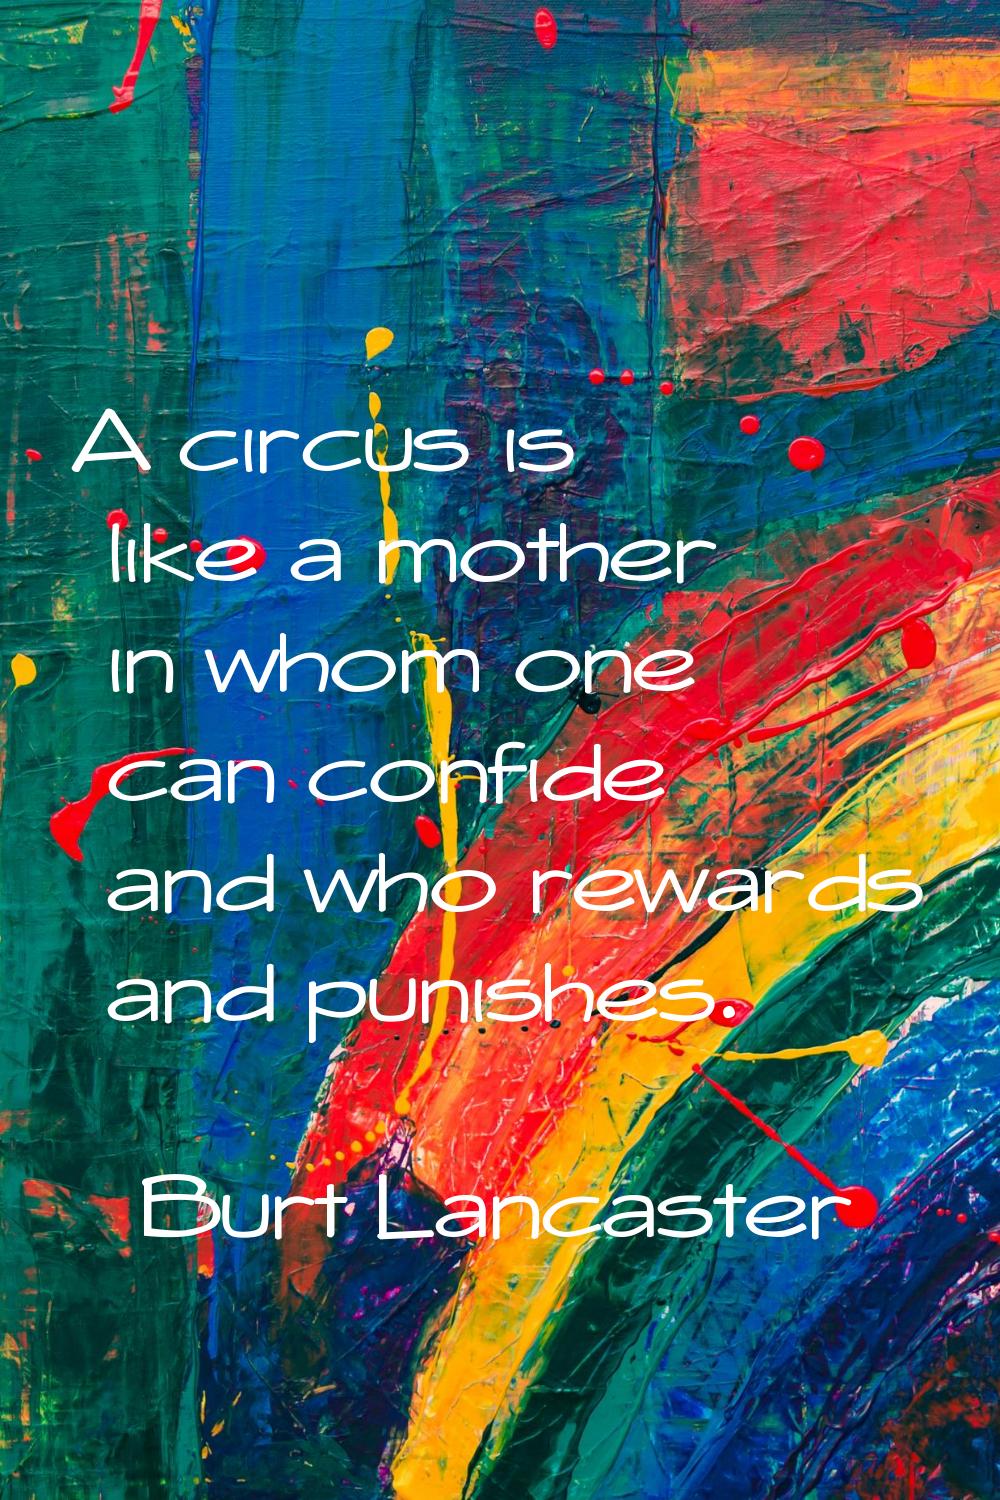 A circus is like a mother in whom one can confide and who rewards and punishes.